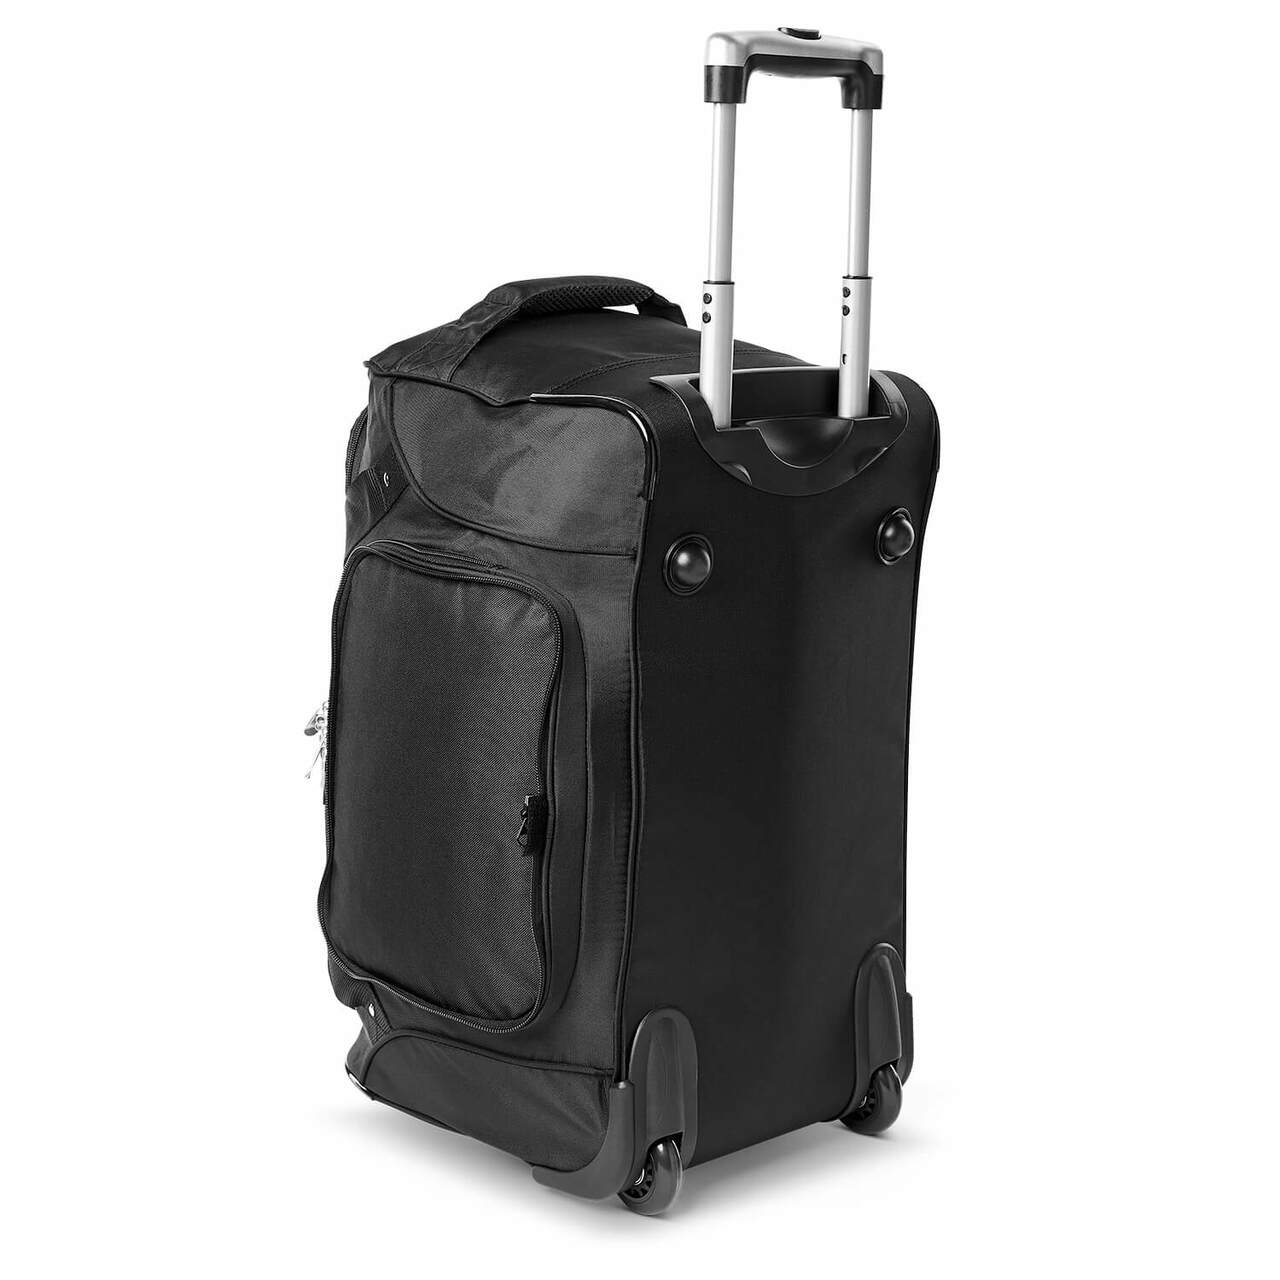 Golden State Warriors Luggage | Golden State Warriors Wheeled Carry On Luggage